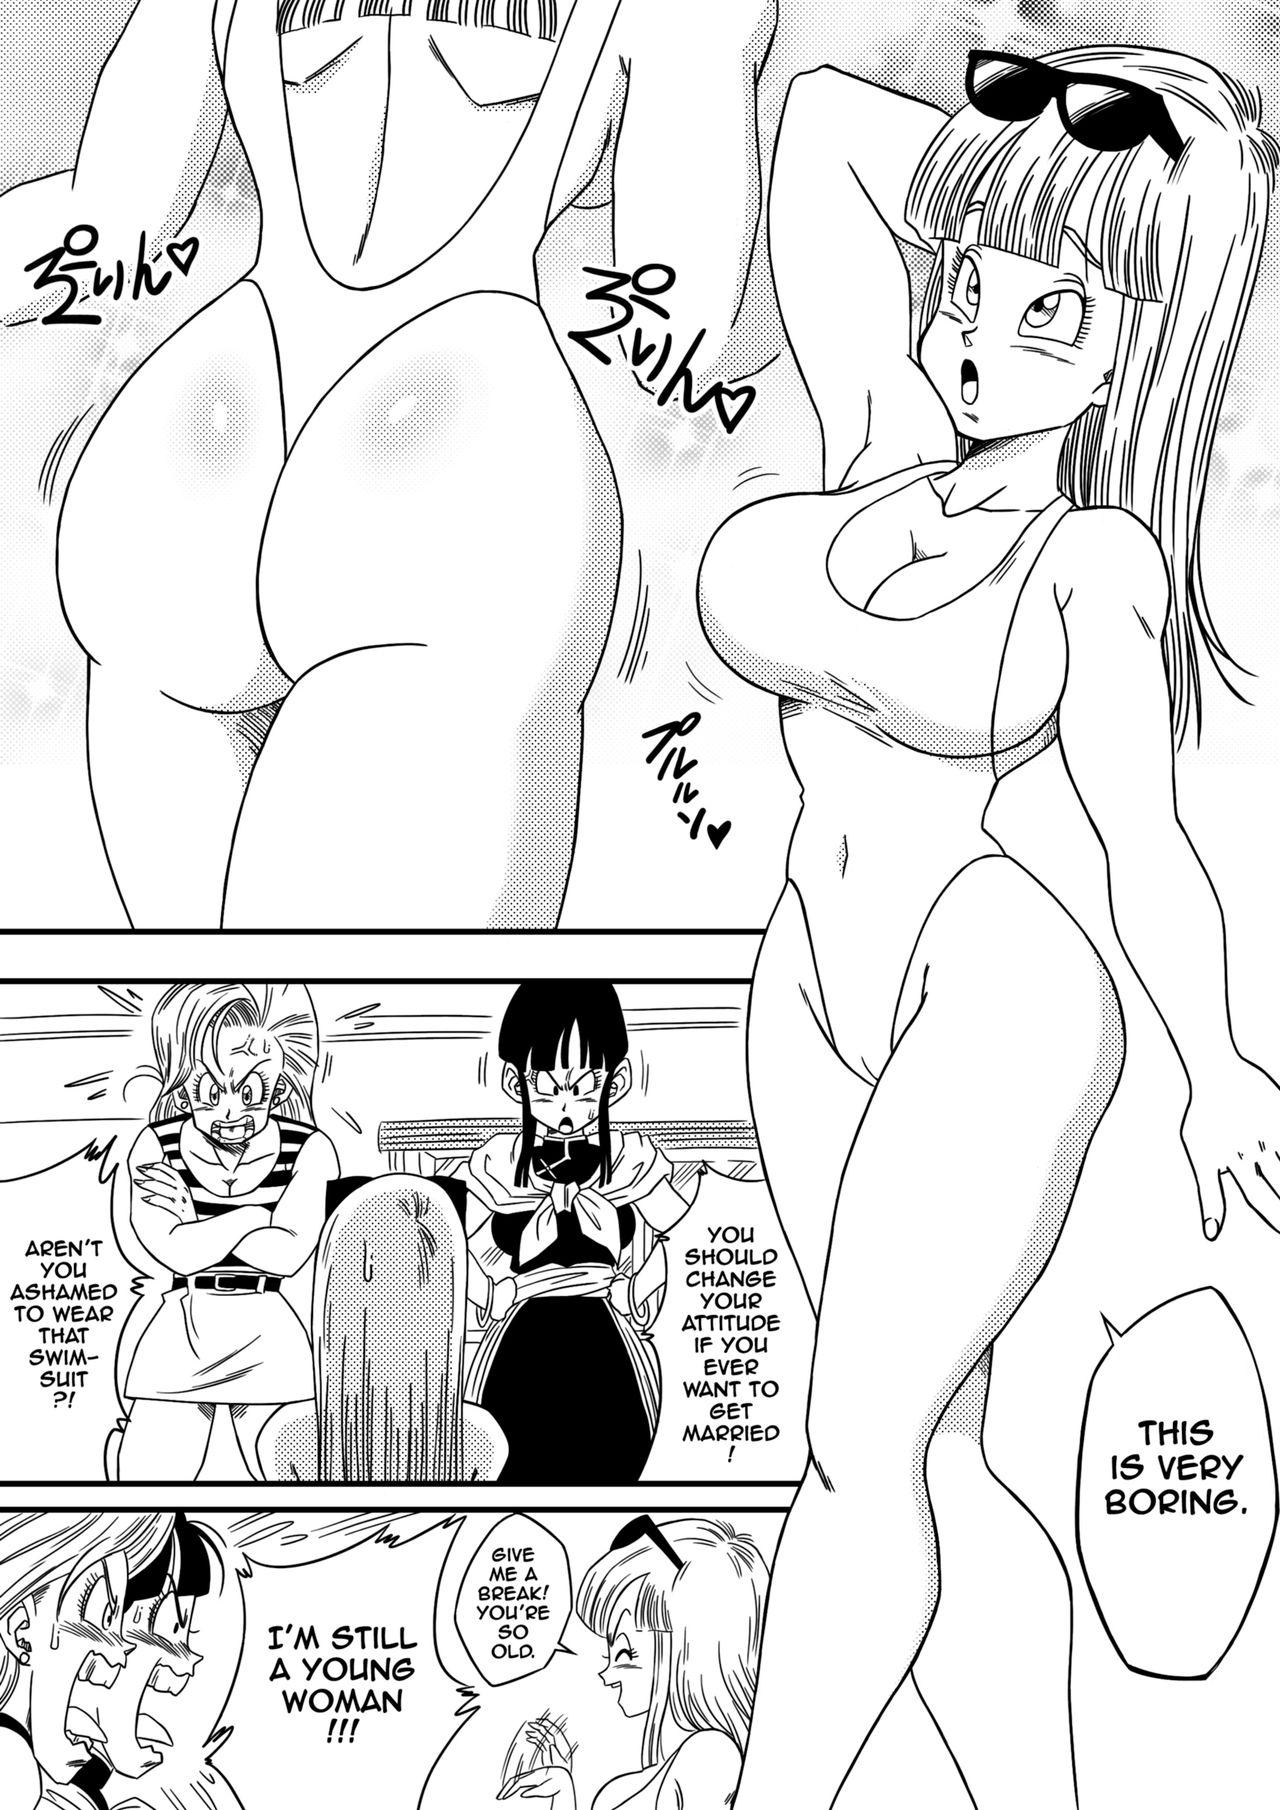 Oiled BITCH GIRLFRIEND - Dragon ball z Home - Page 4